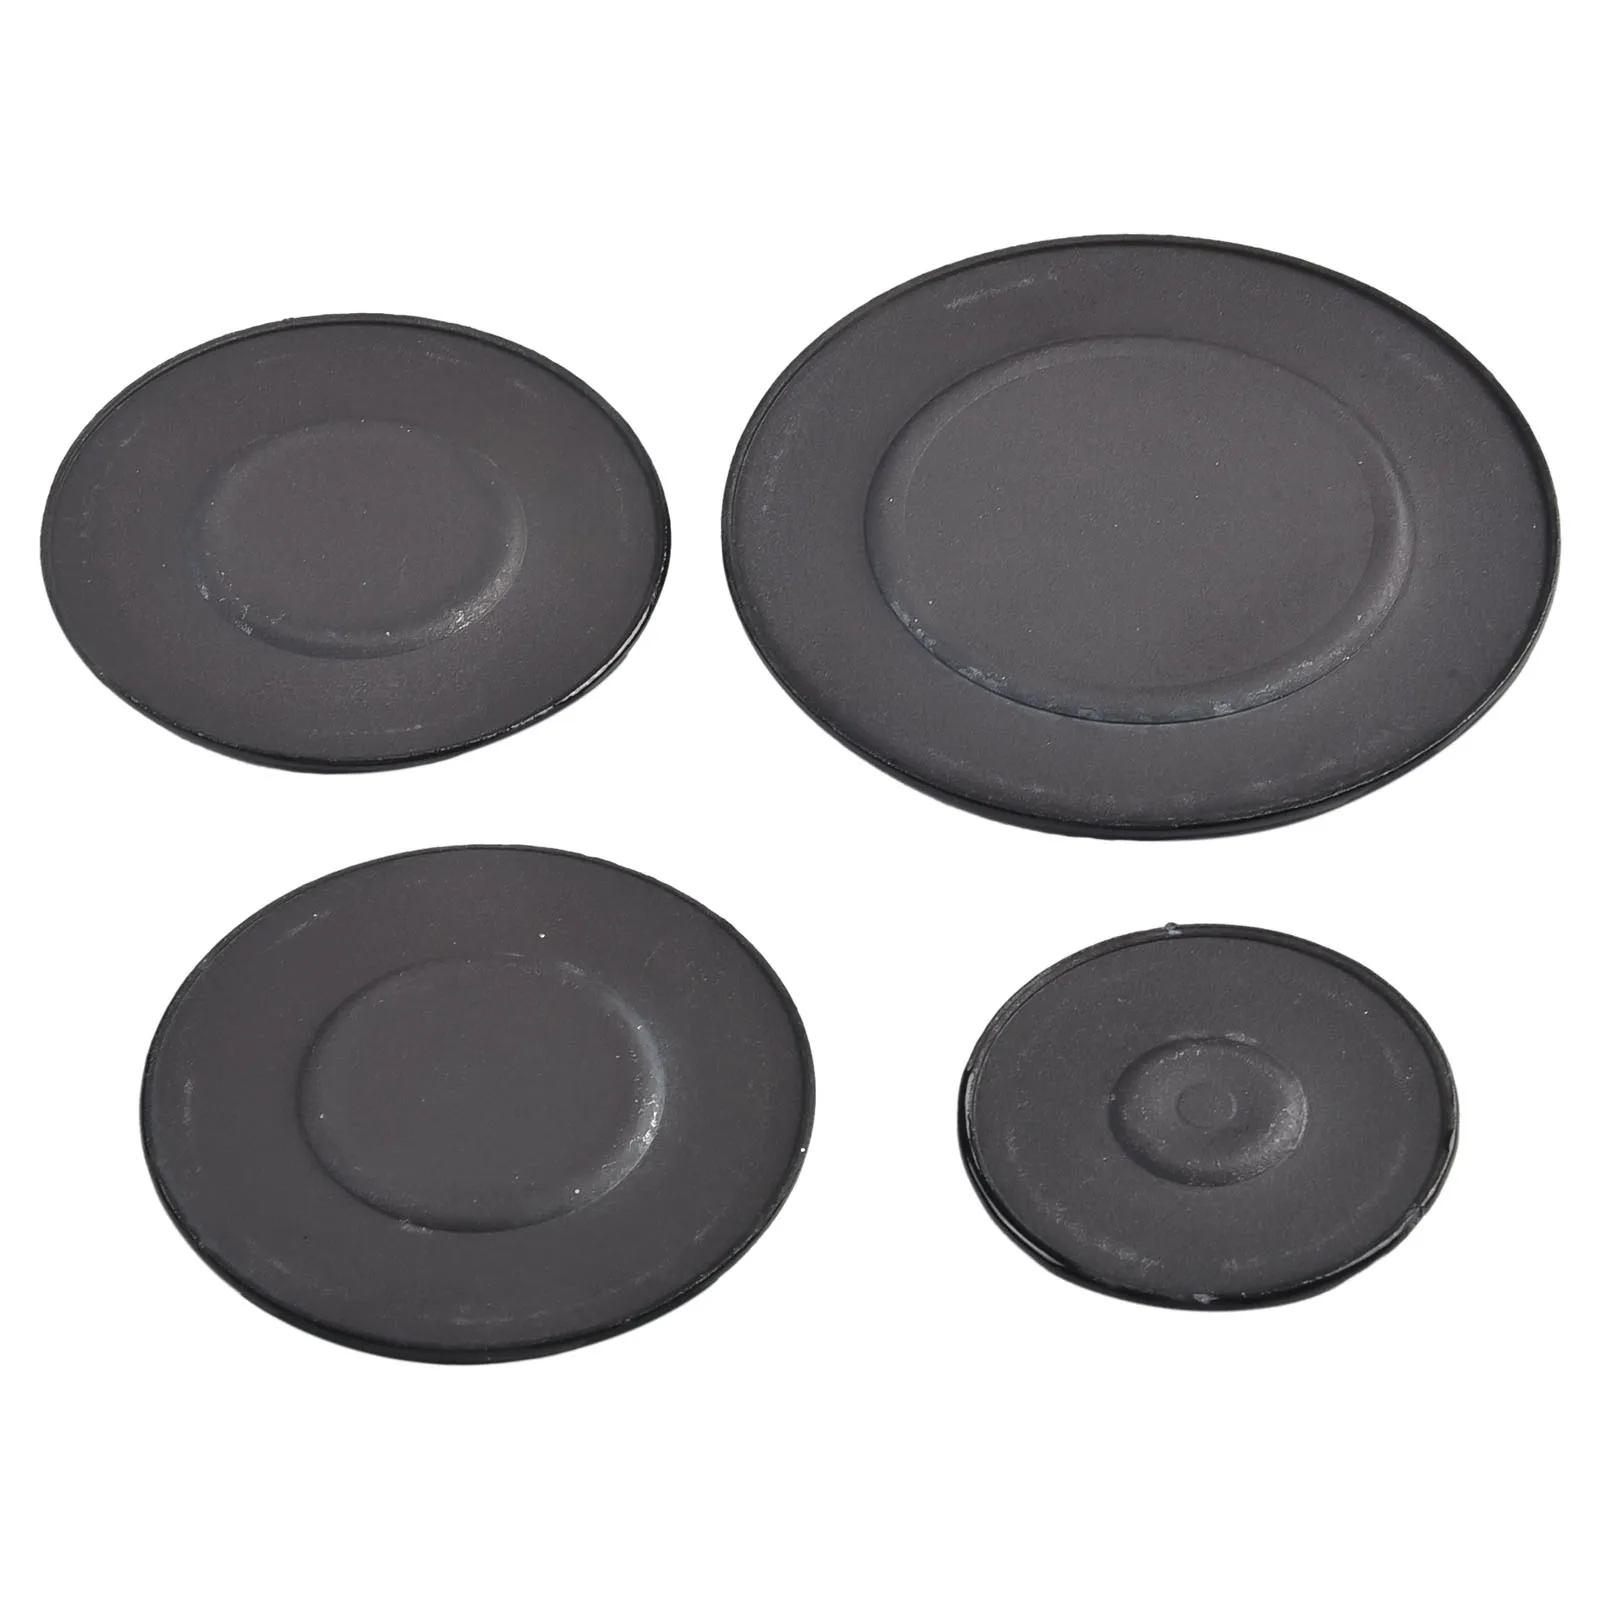 Gas Stove Burner Lid Set Materials Ensures Durability And Performance Uniform Heat Distribution Easy To Clean After Cooking